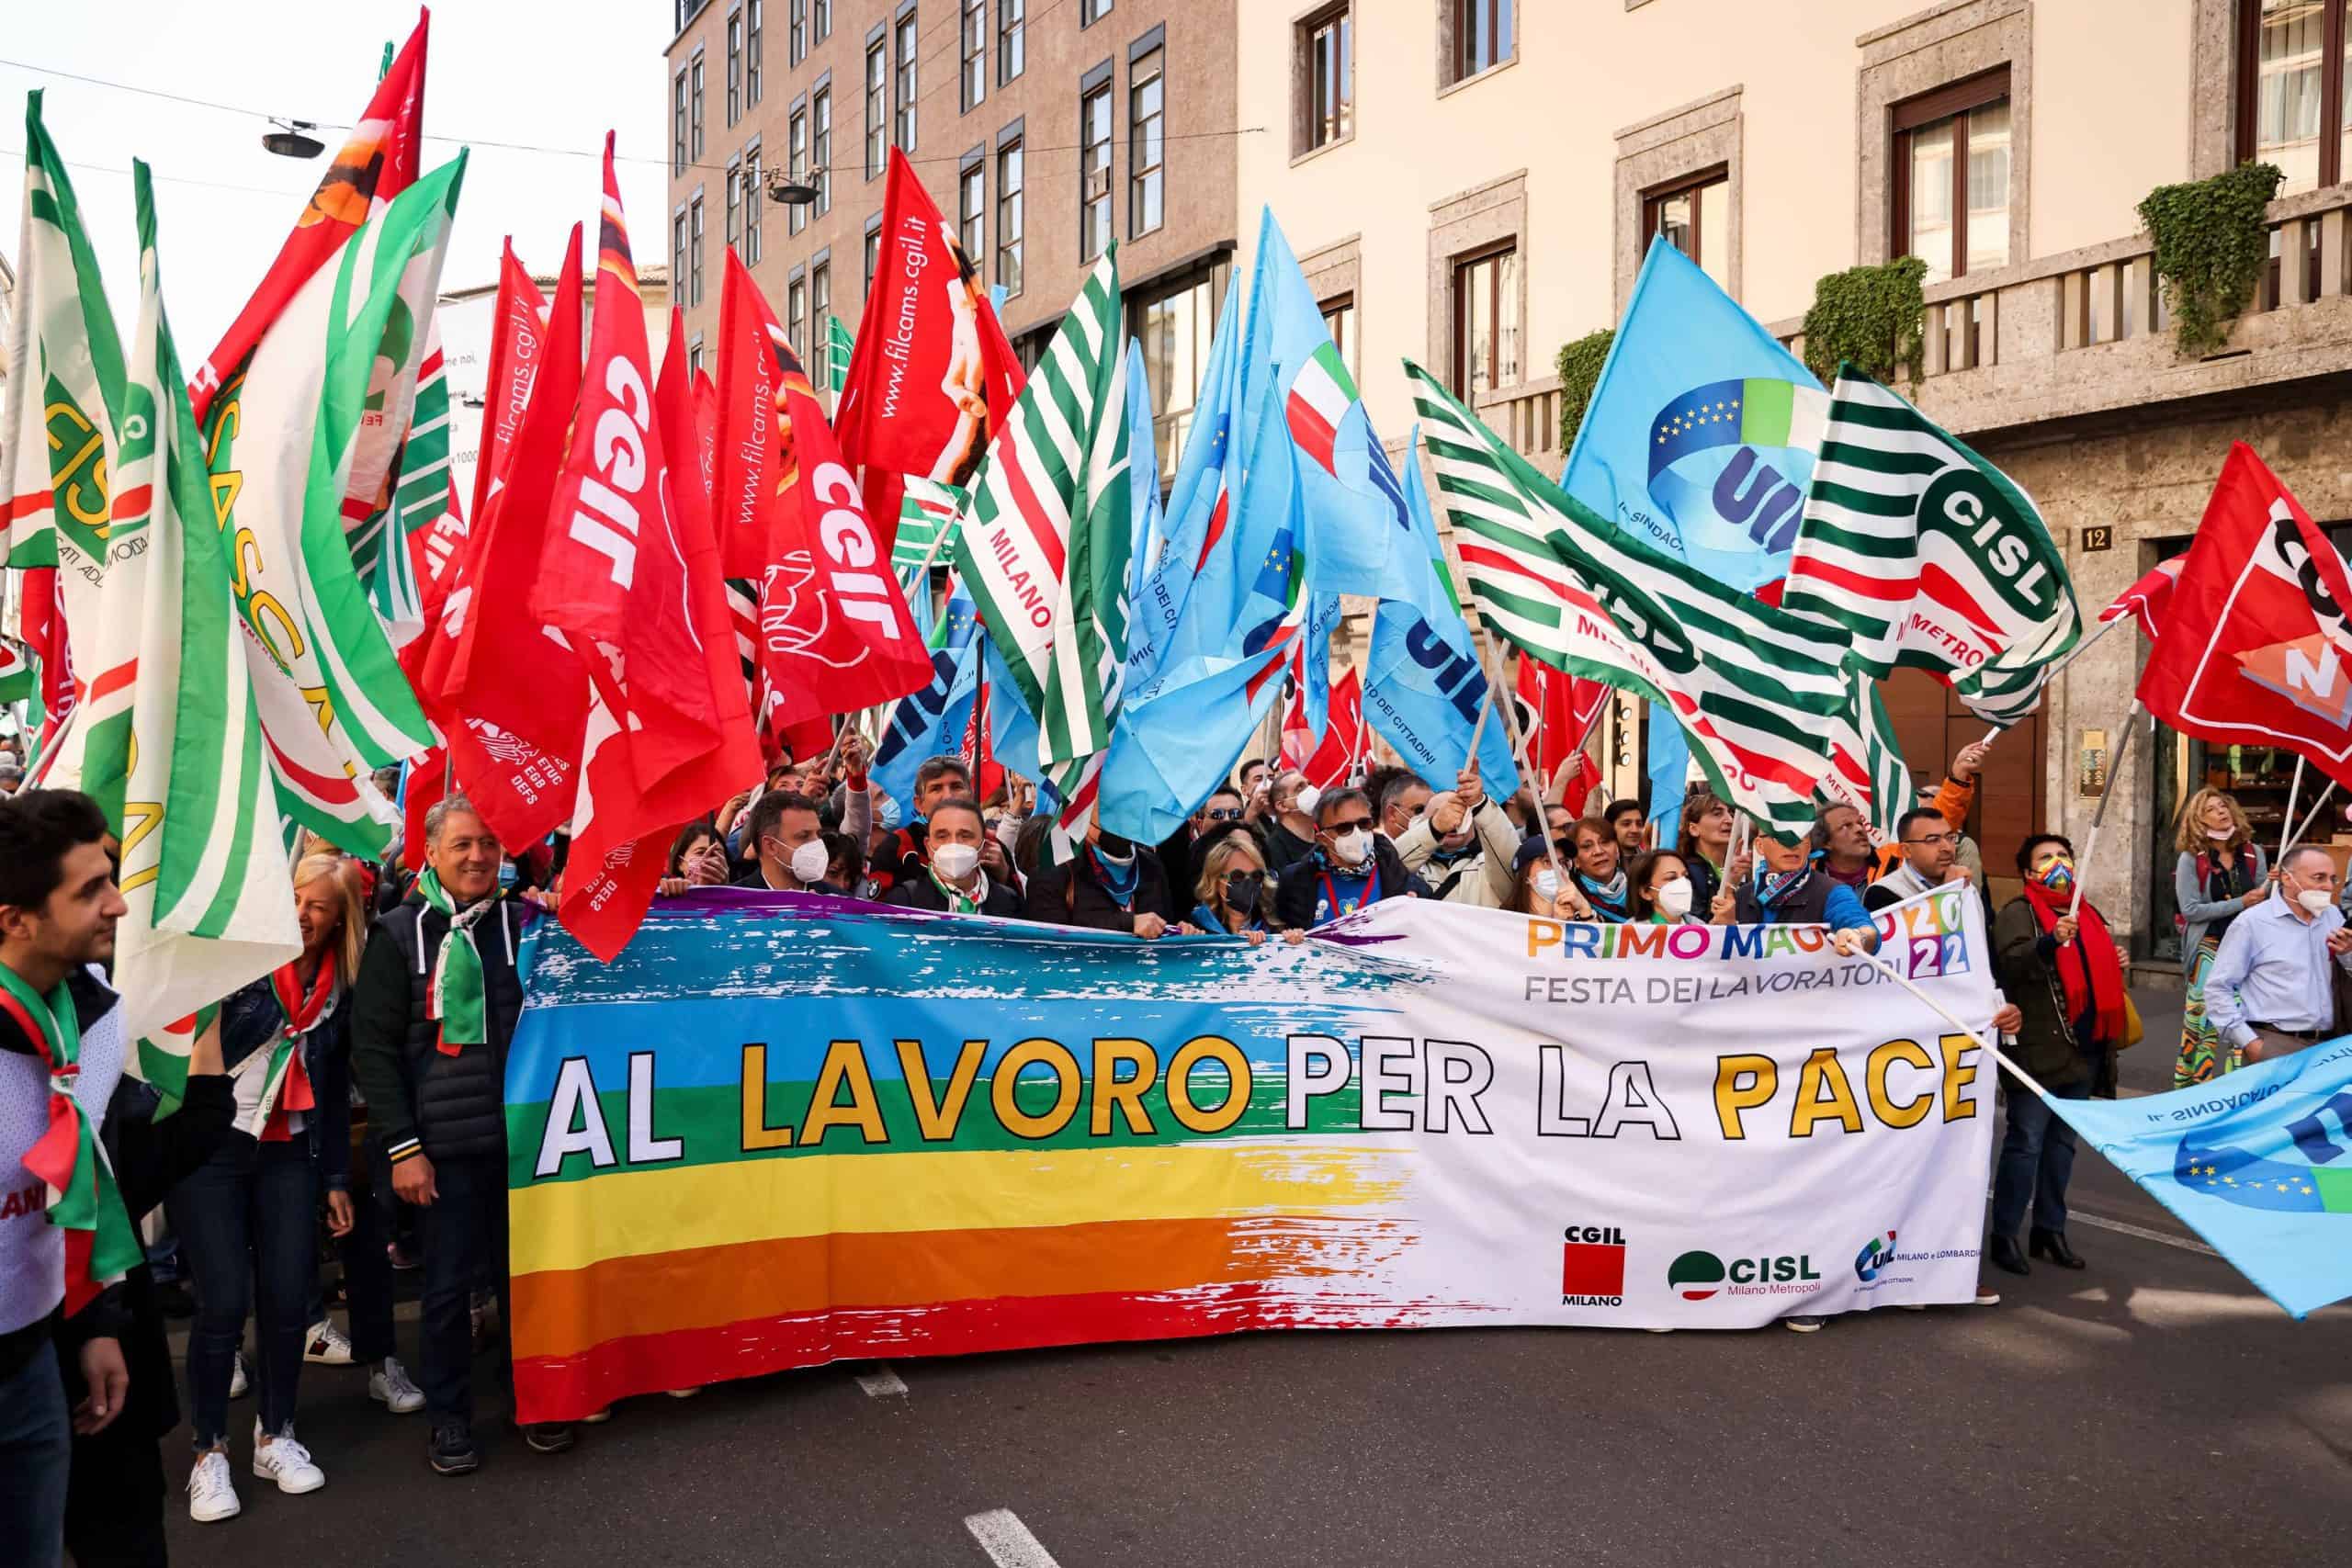 In pics: May Day rallies in Europe honour workers and protest at governments